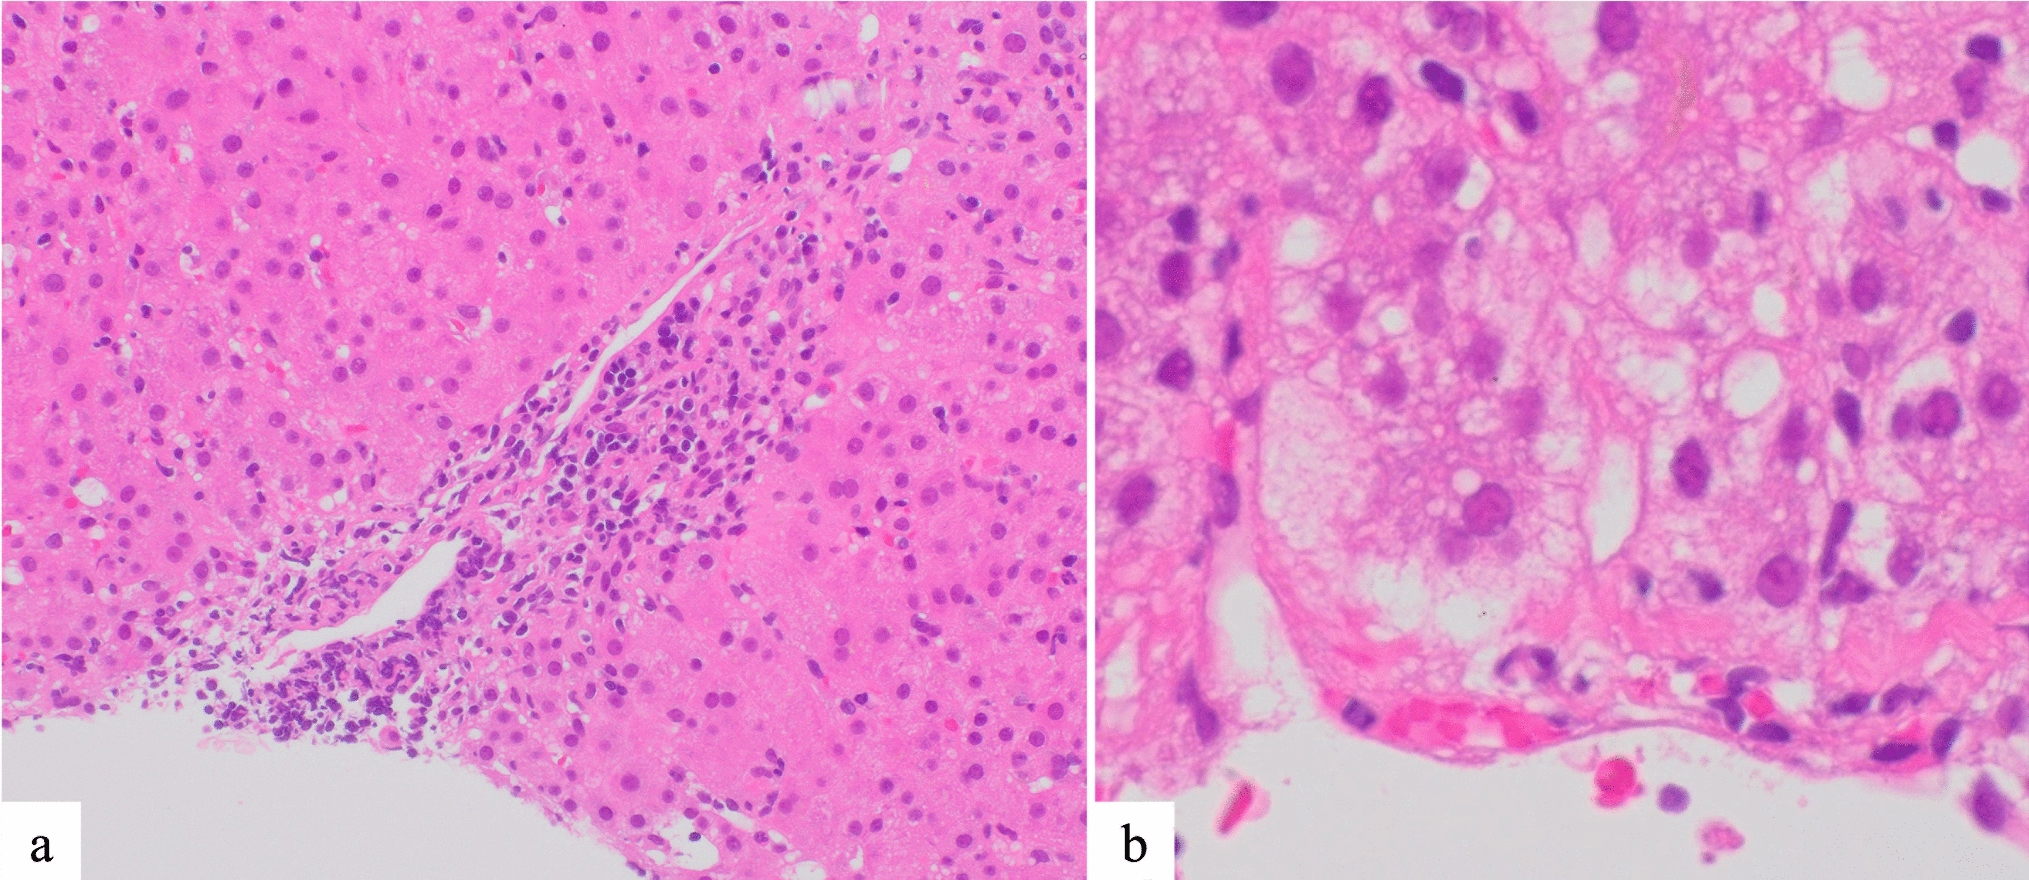 Simultaneous occurrence of autoimmune hepatitis and autoimmune hemolytic anemia after COVID-19 infection: case report and literature review